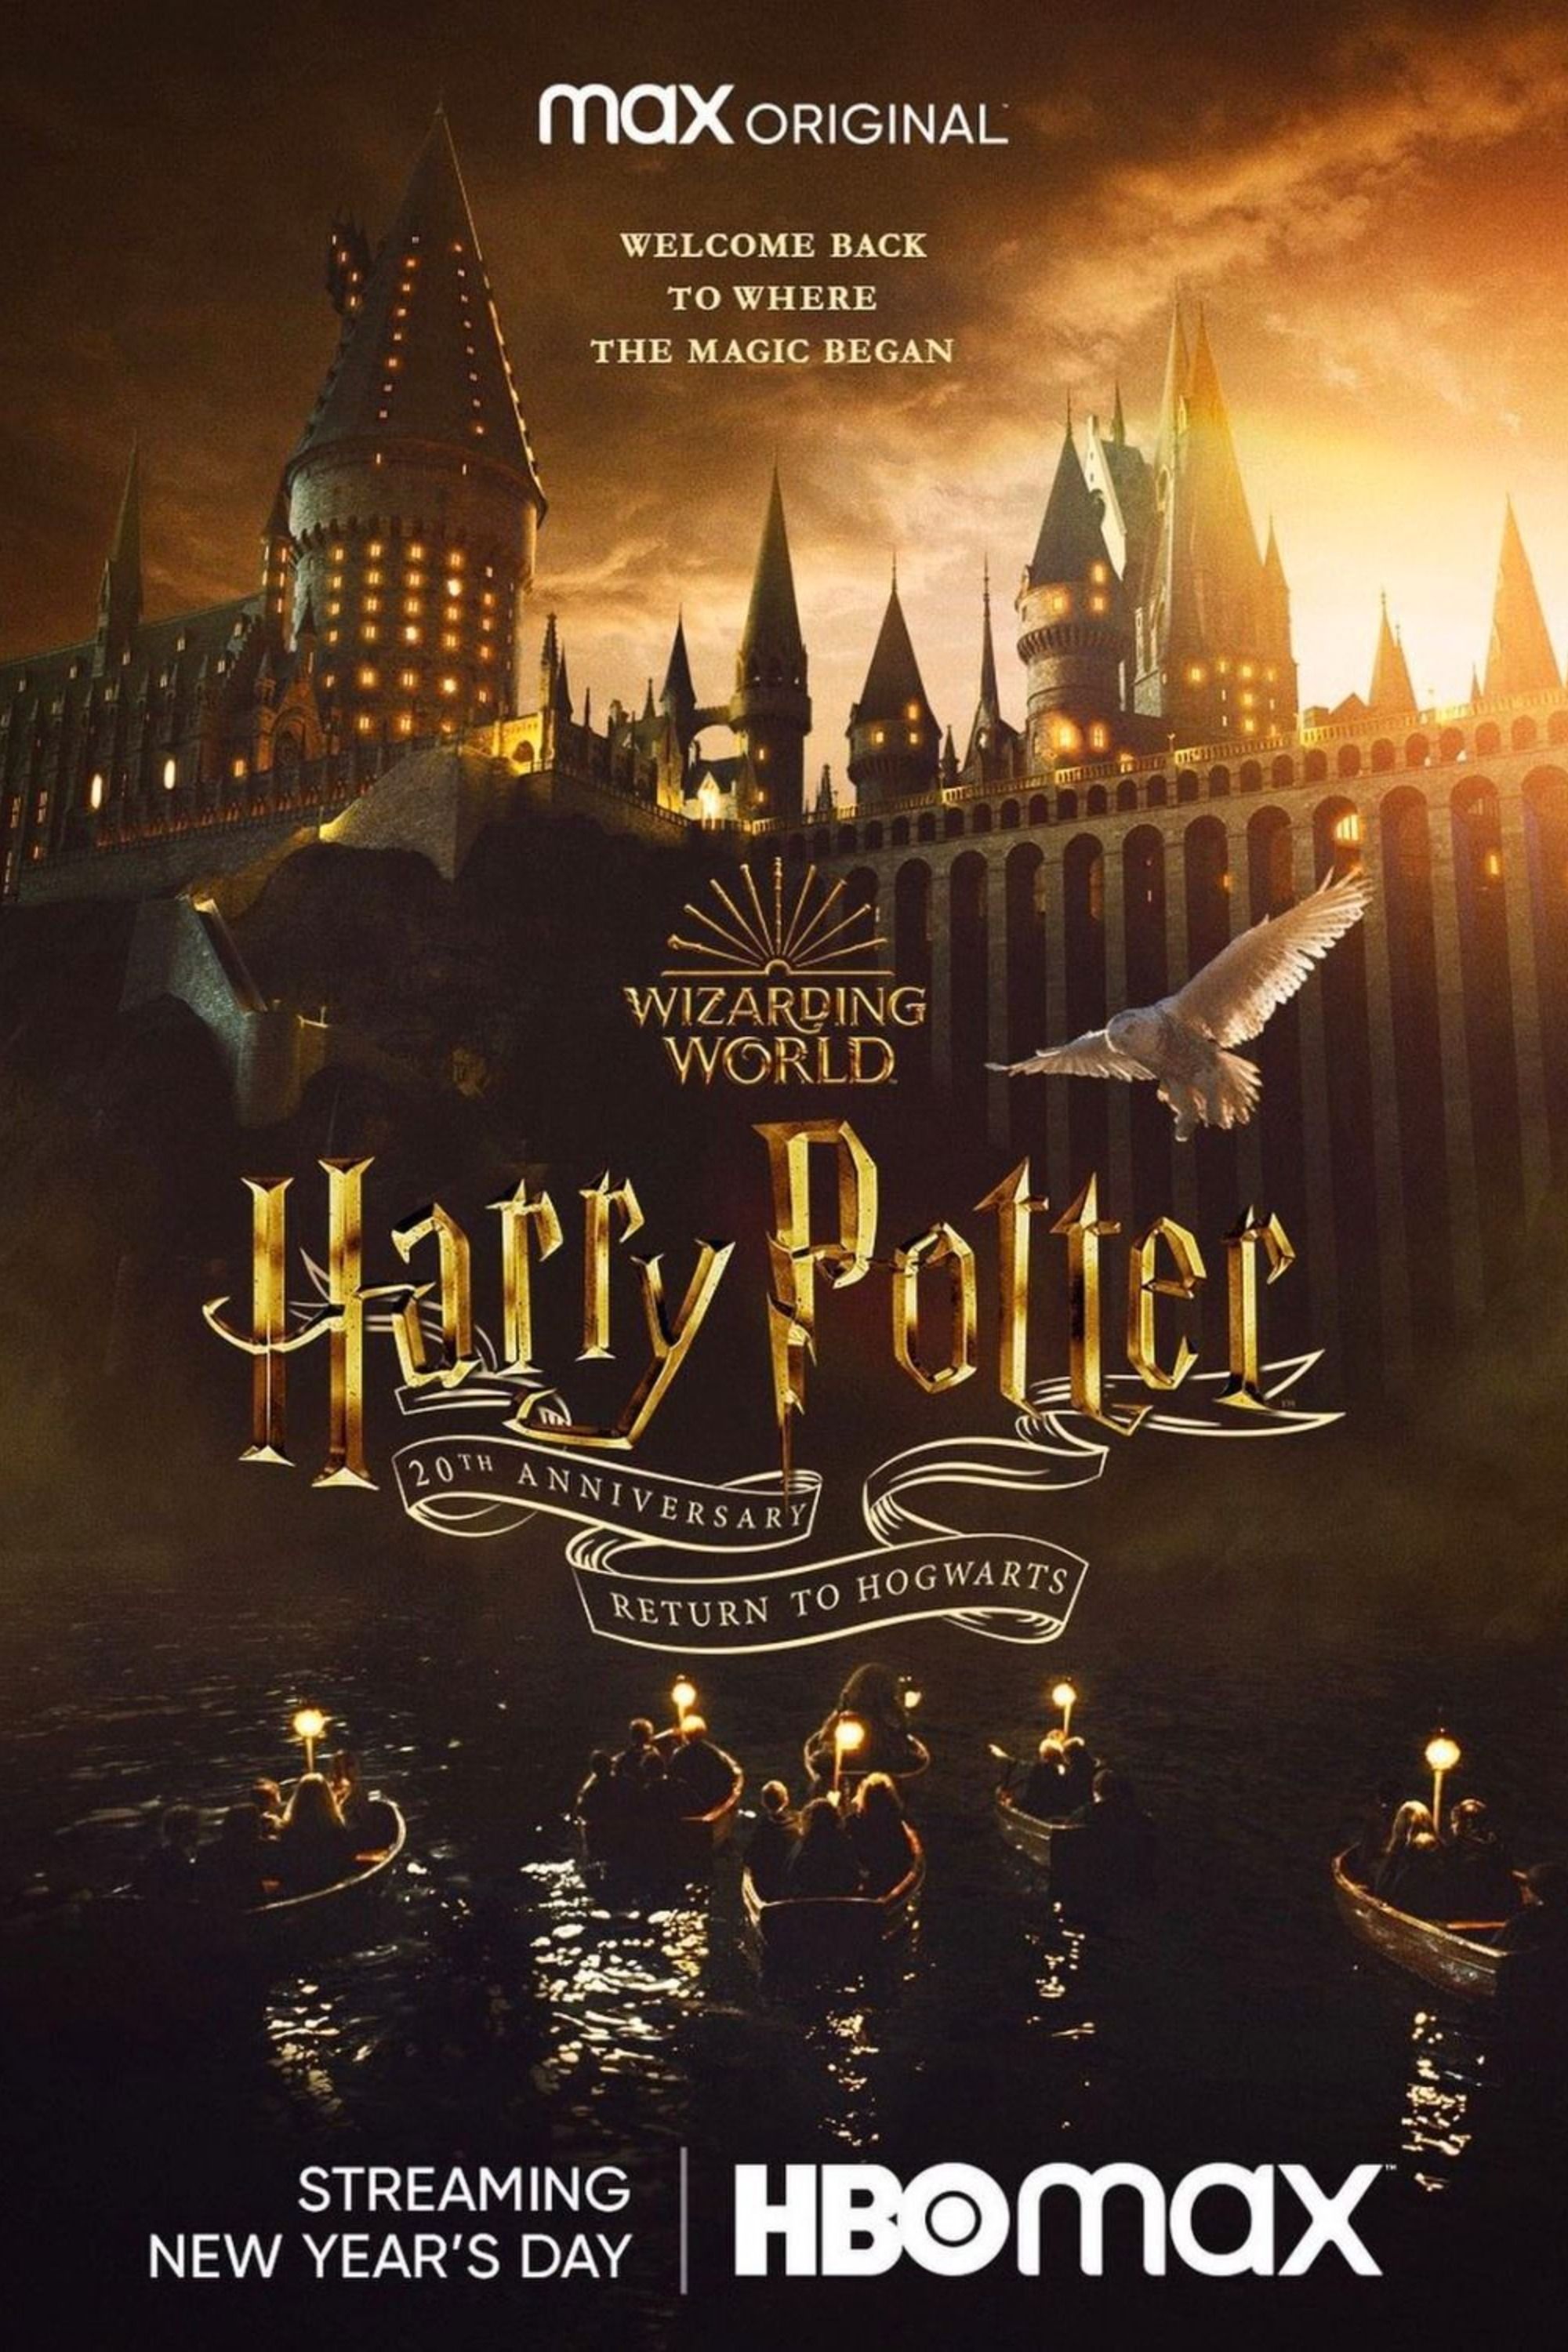 Magic in a Bottle: Celebrating the 20 Year Anniversary of Harry